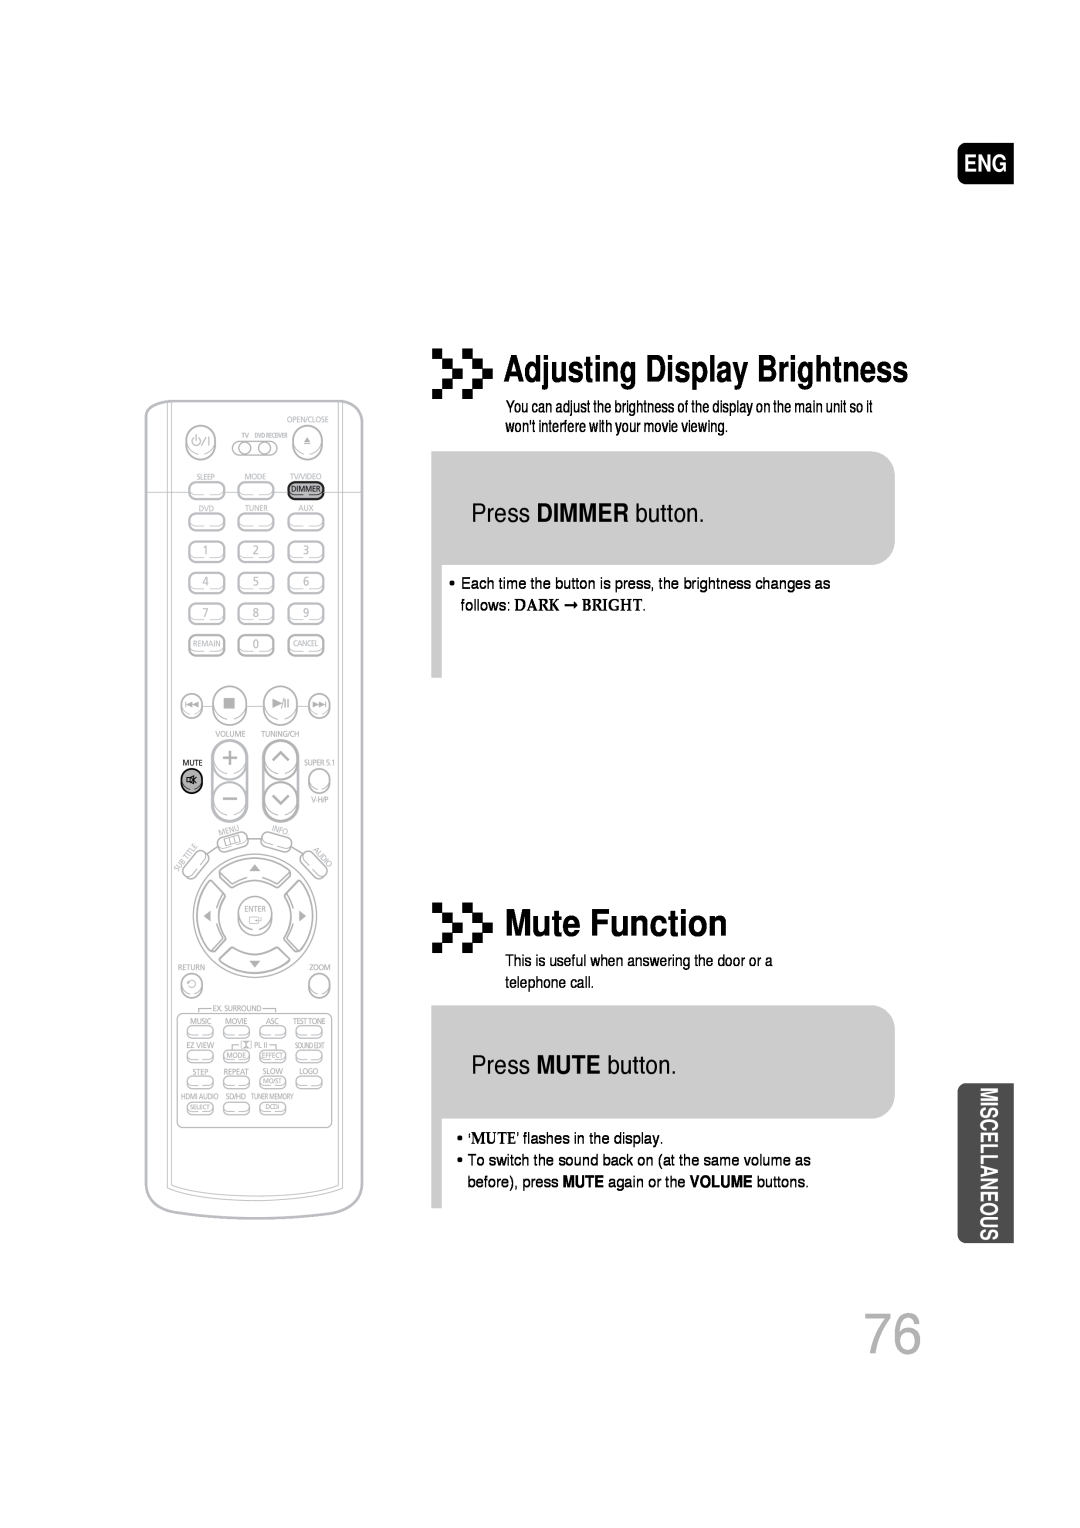 Samsung AH68-01720S Mute Function, Adjusting Display Brightness, Press DIMMER button, Press MUTE button, Miscellaneous 